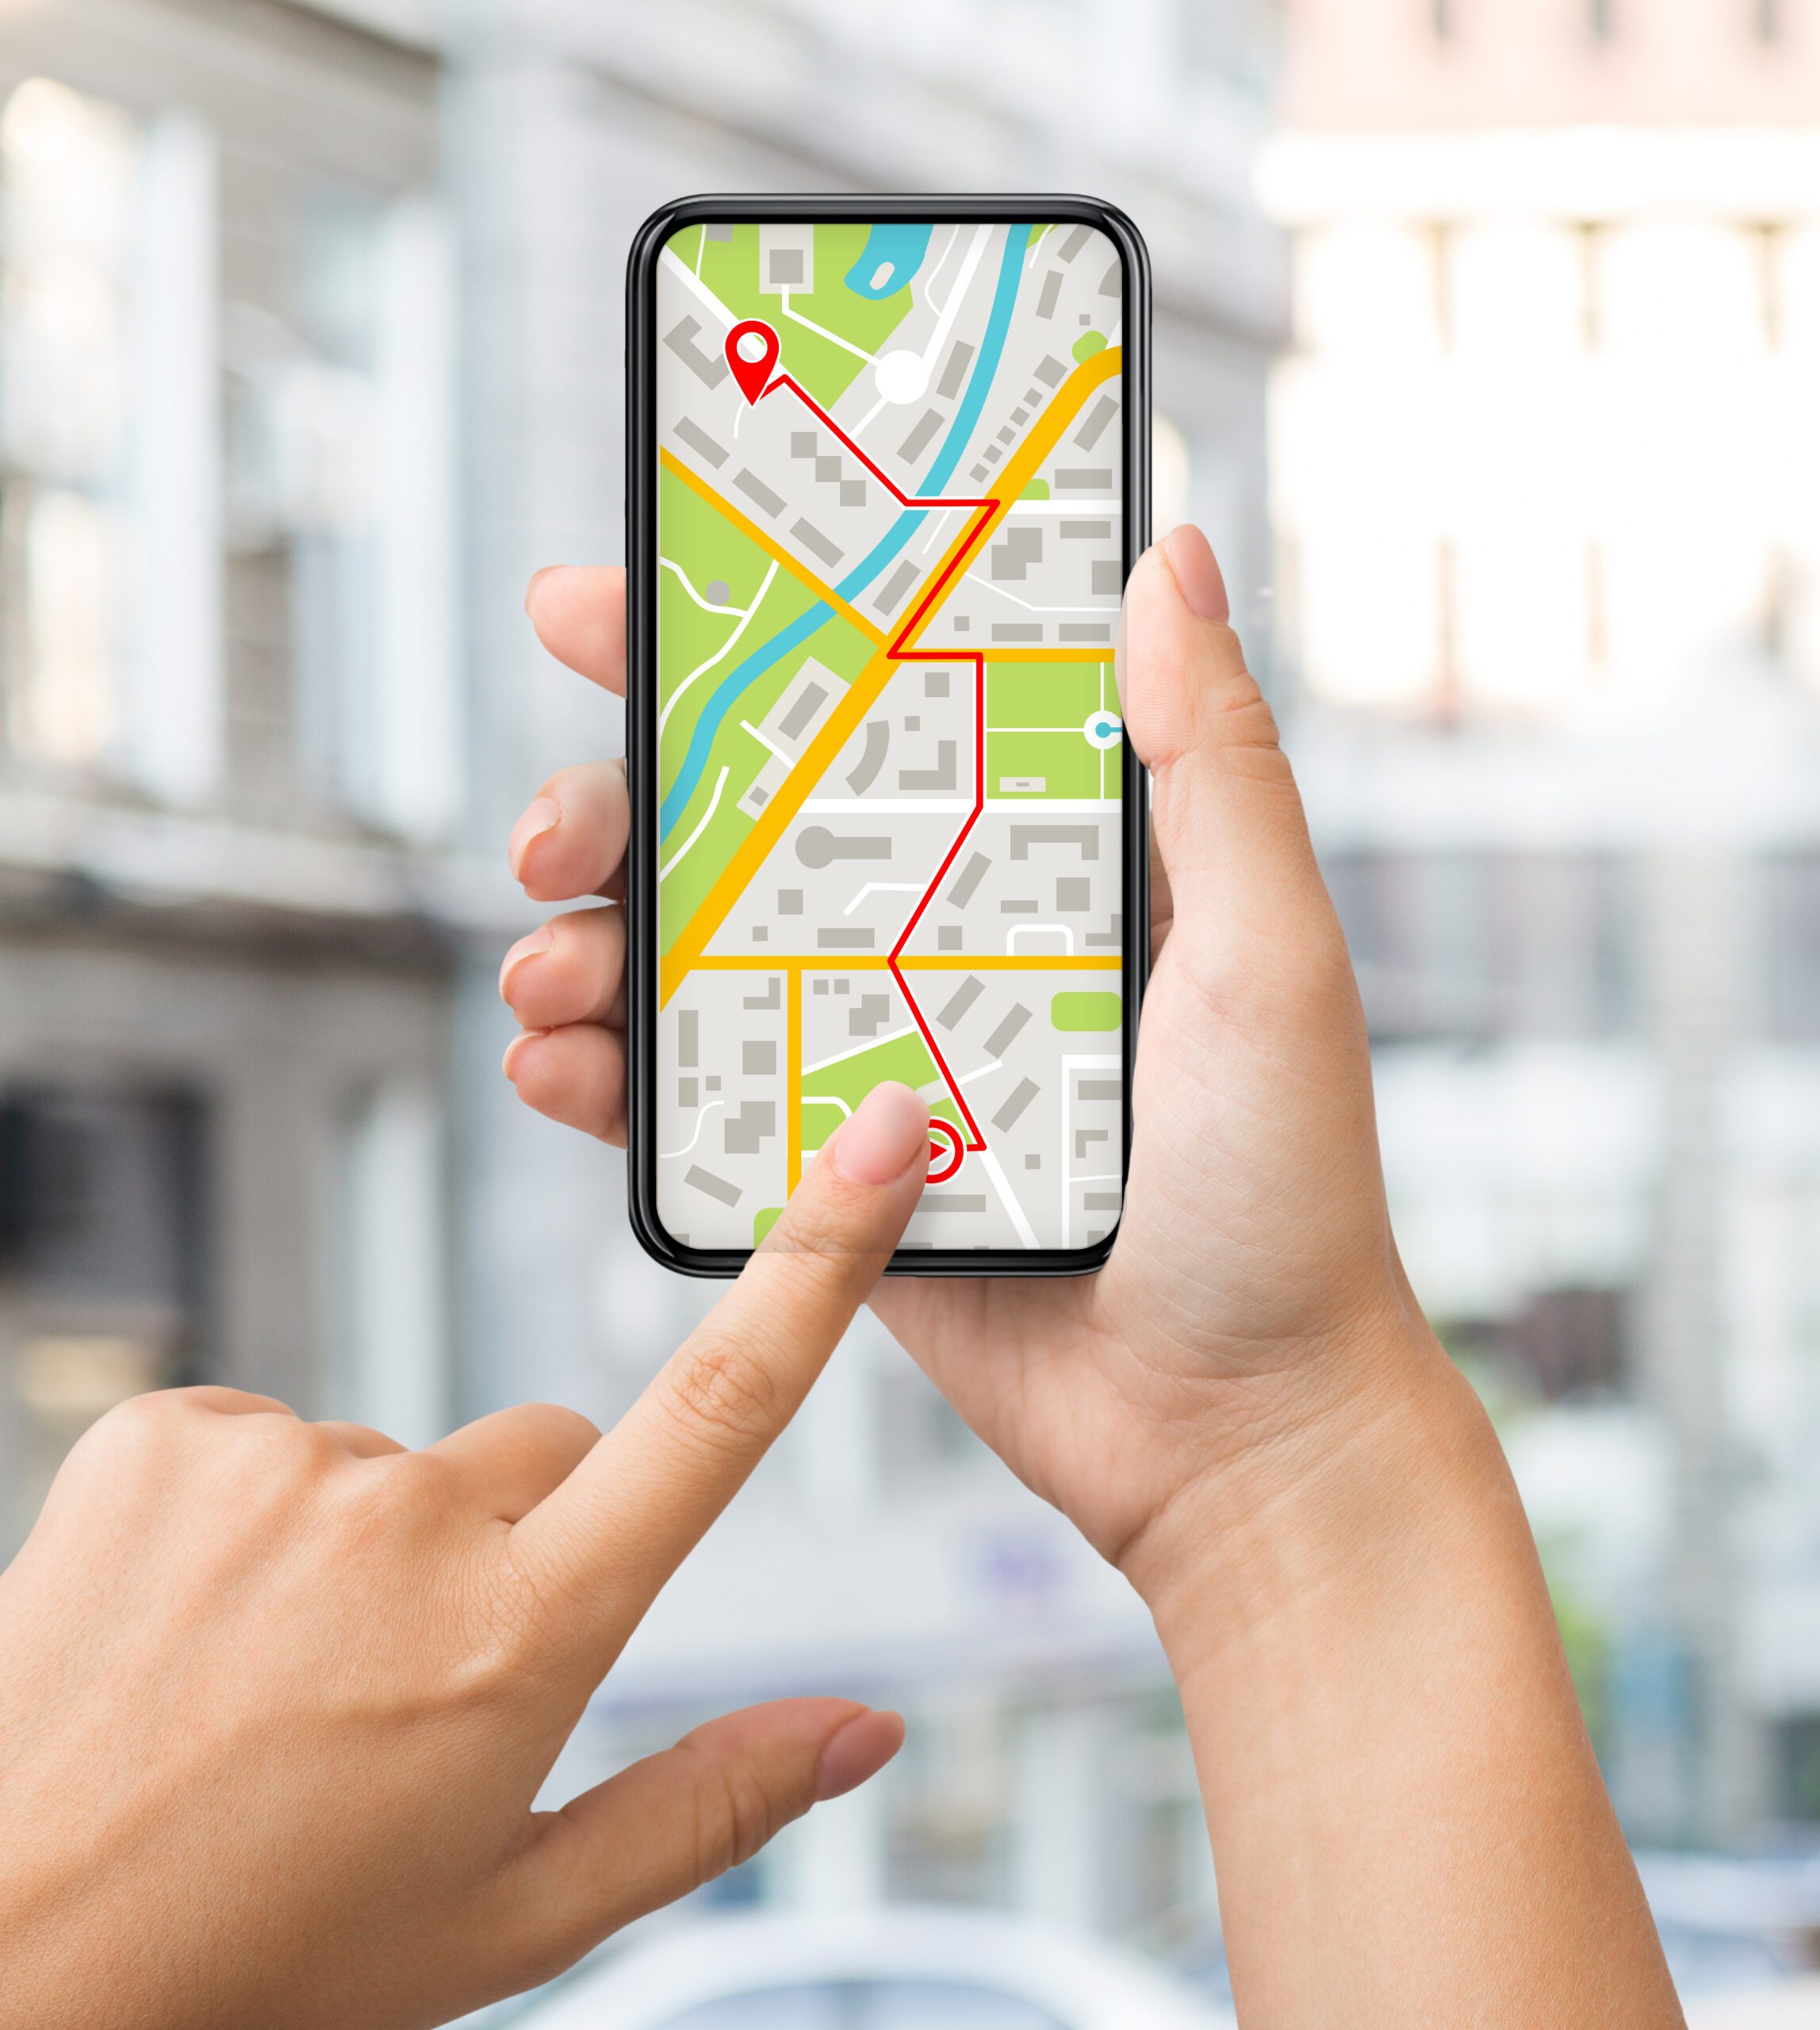 navigation app with street map opened on smartphon 2021 09 01 16 03 04 utc scaled - Navigation App With Street Map Opened On Smartphone In Female Hands